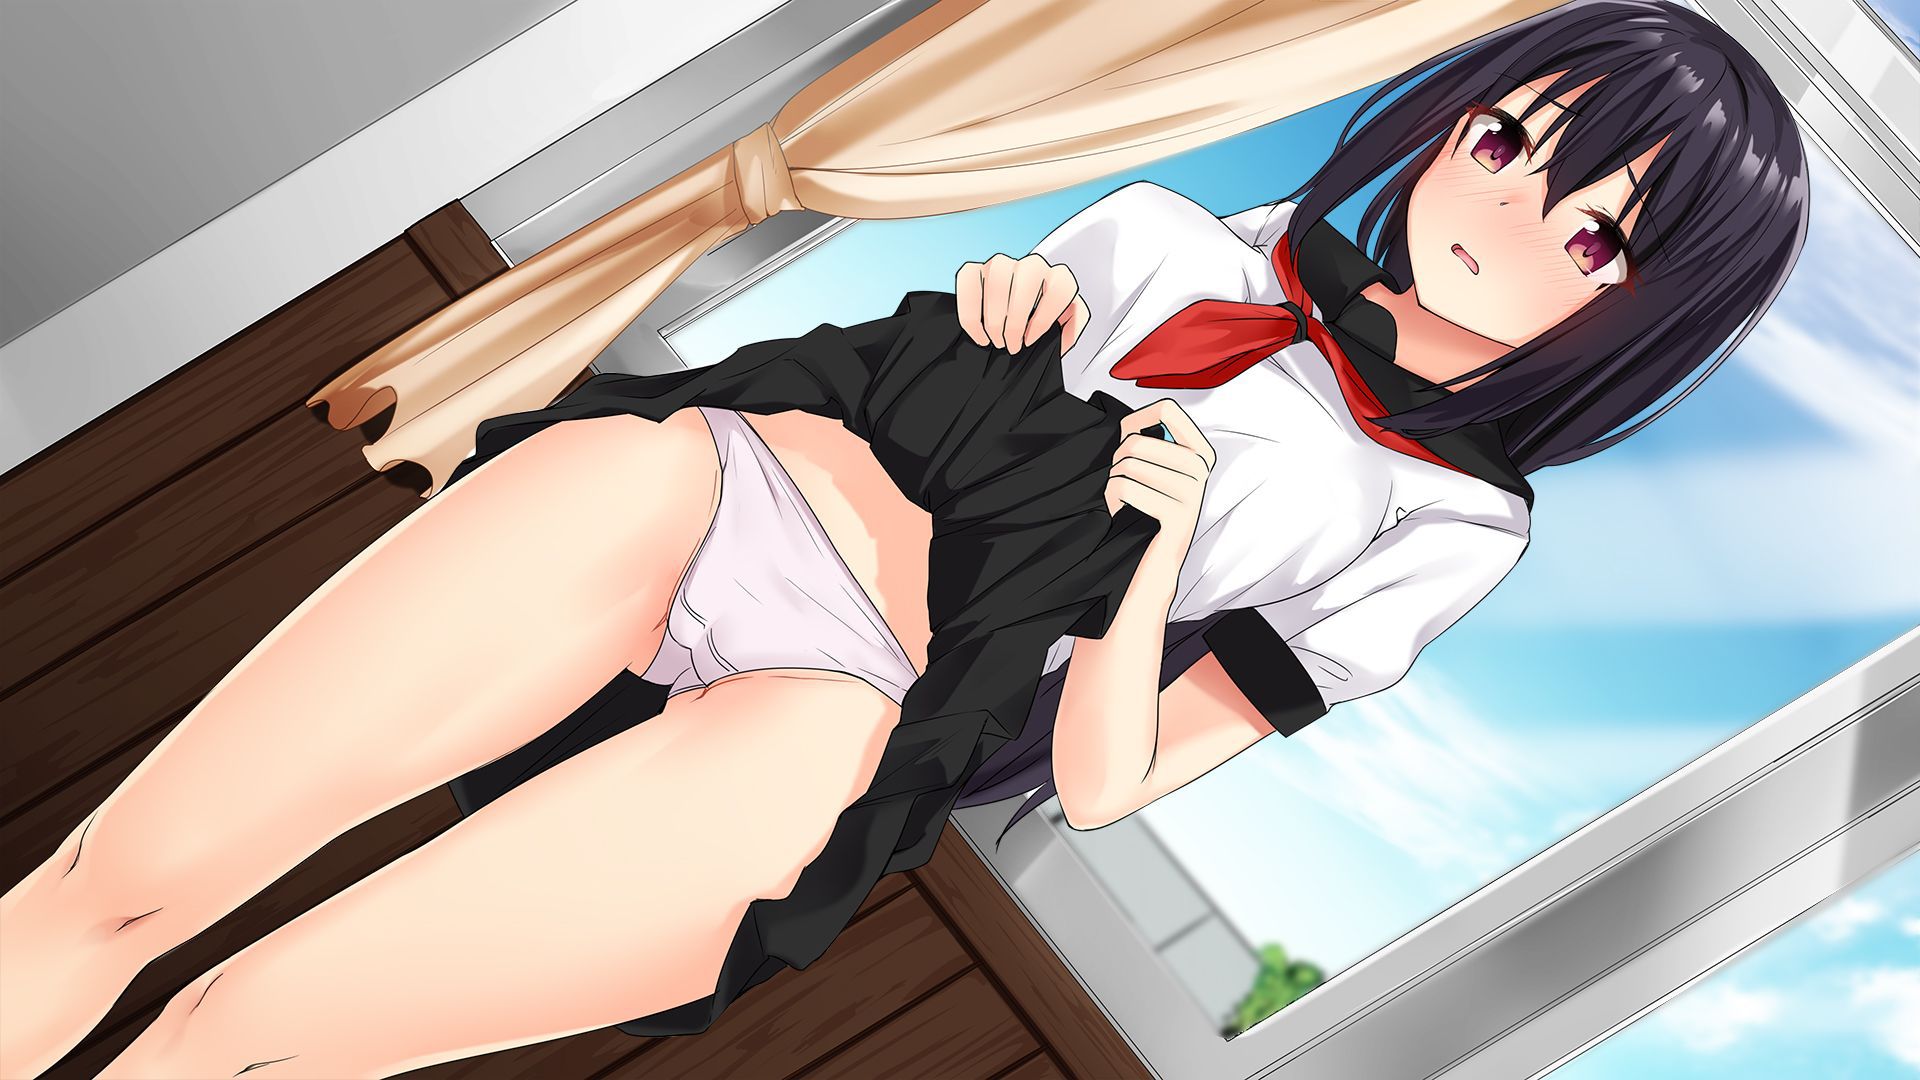 Secondary erotic erotic image of a lewd girl who raises her skirt and shows her pants [30 pieces] 18